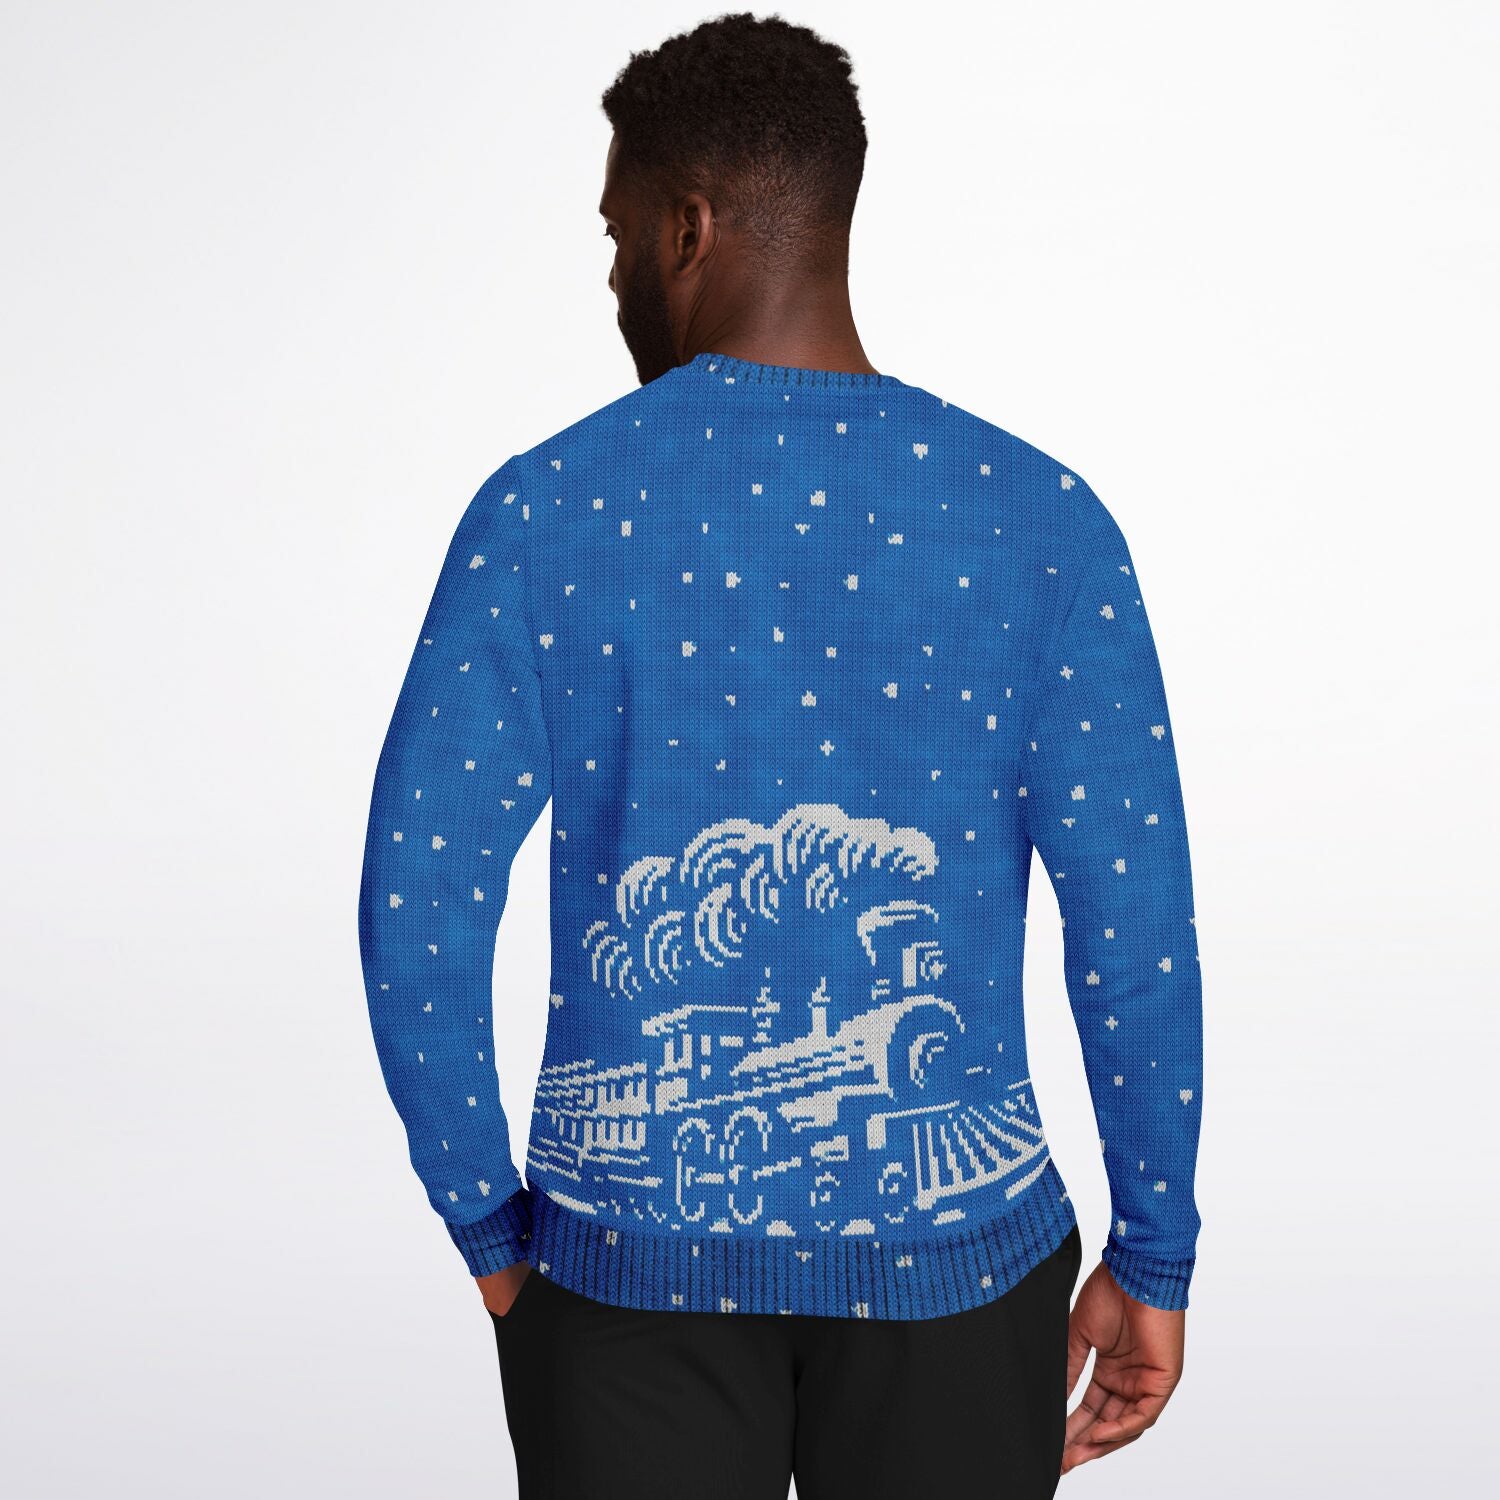 Bipolar Express Ugly Sweater - Sport Finesse